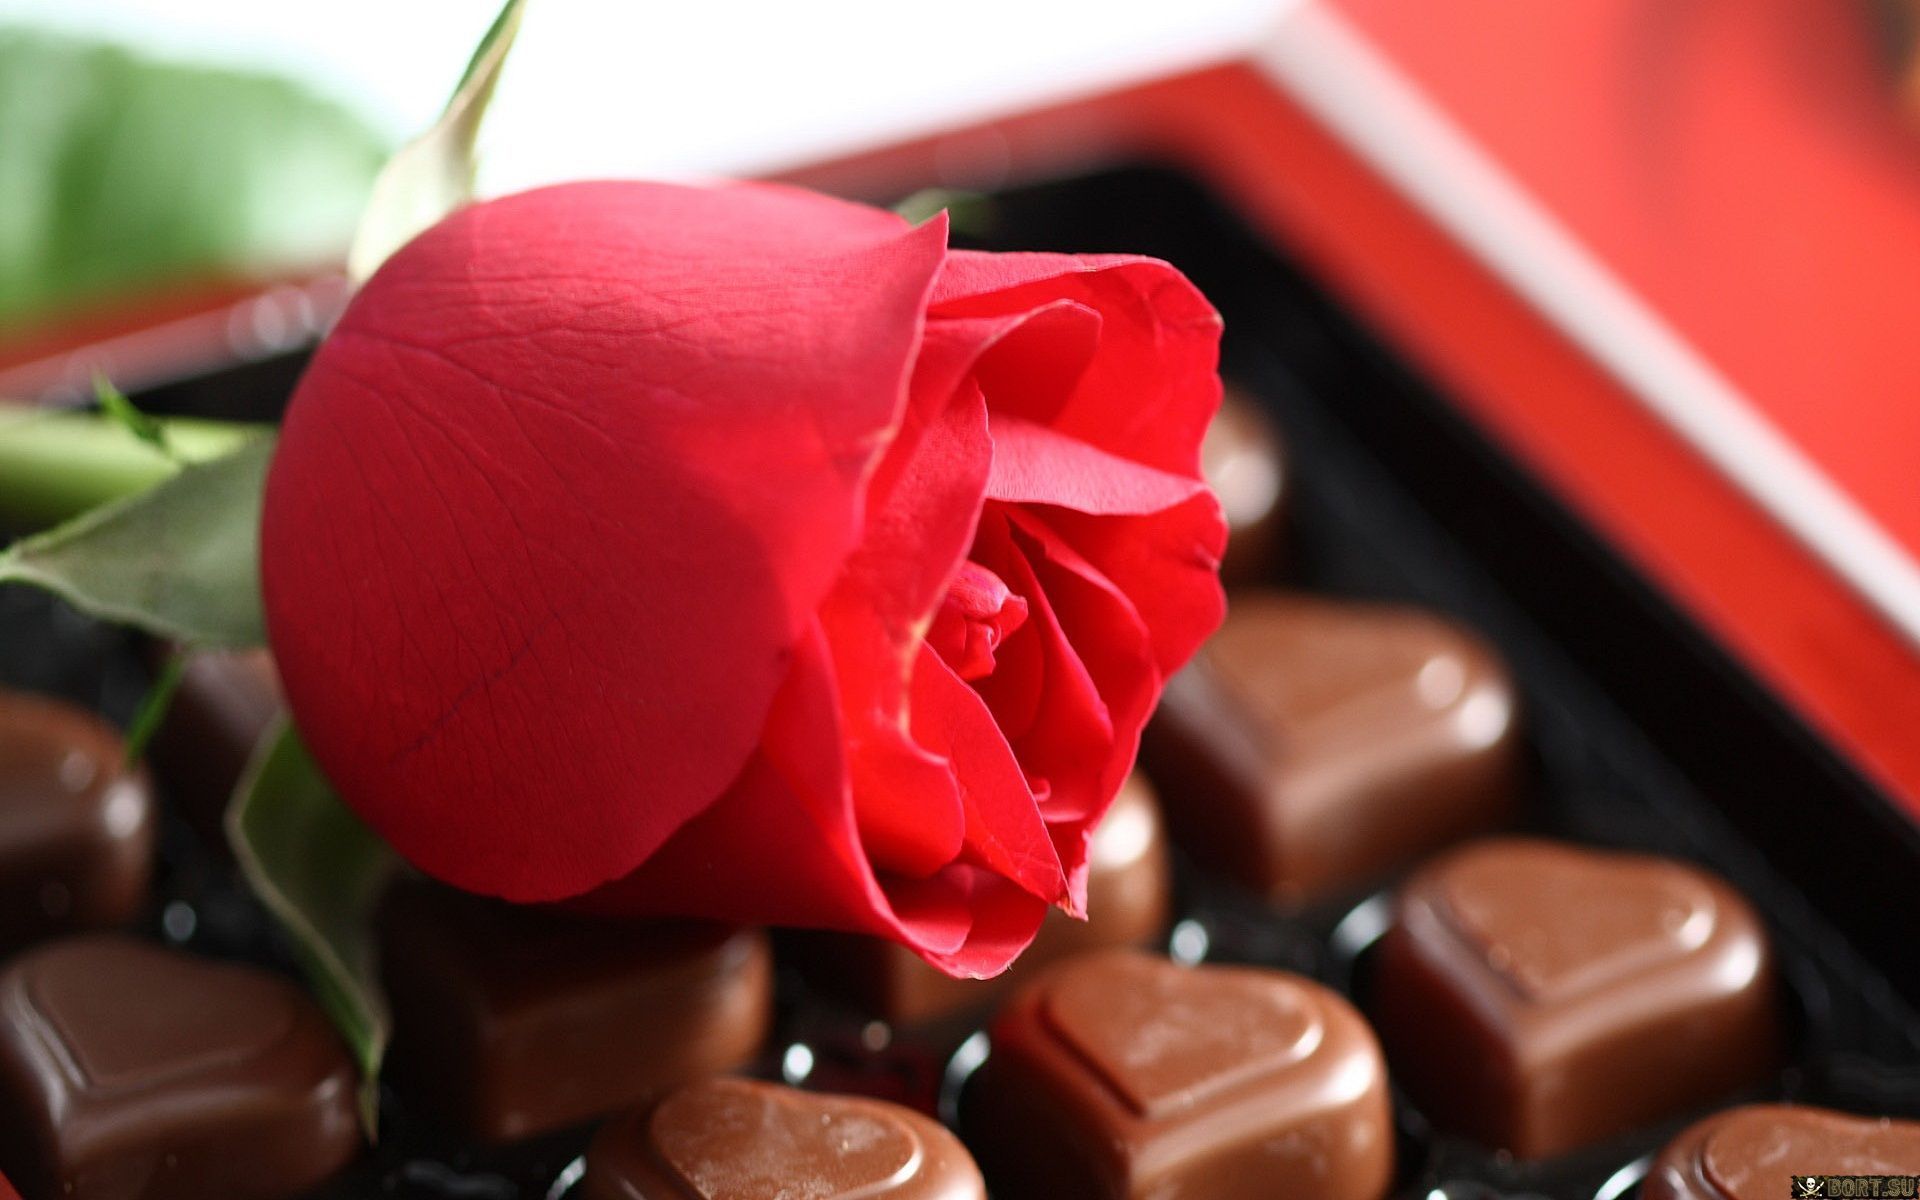 Rose Chocolate Valentines Day Wallpaper Desktop Day Dp For Whatsapp